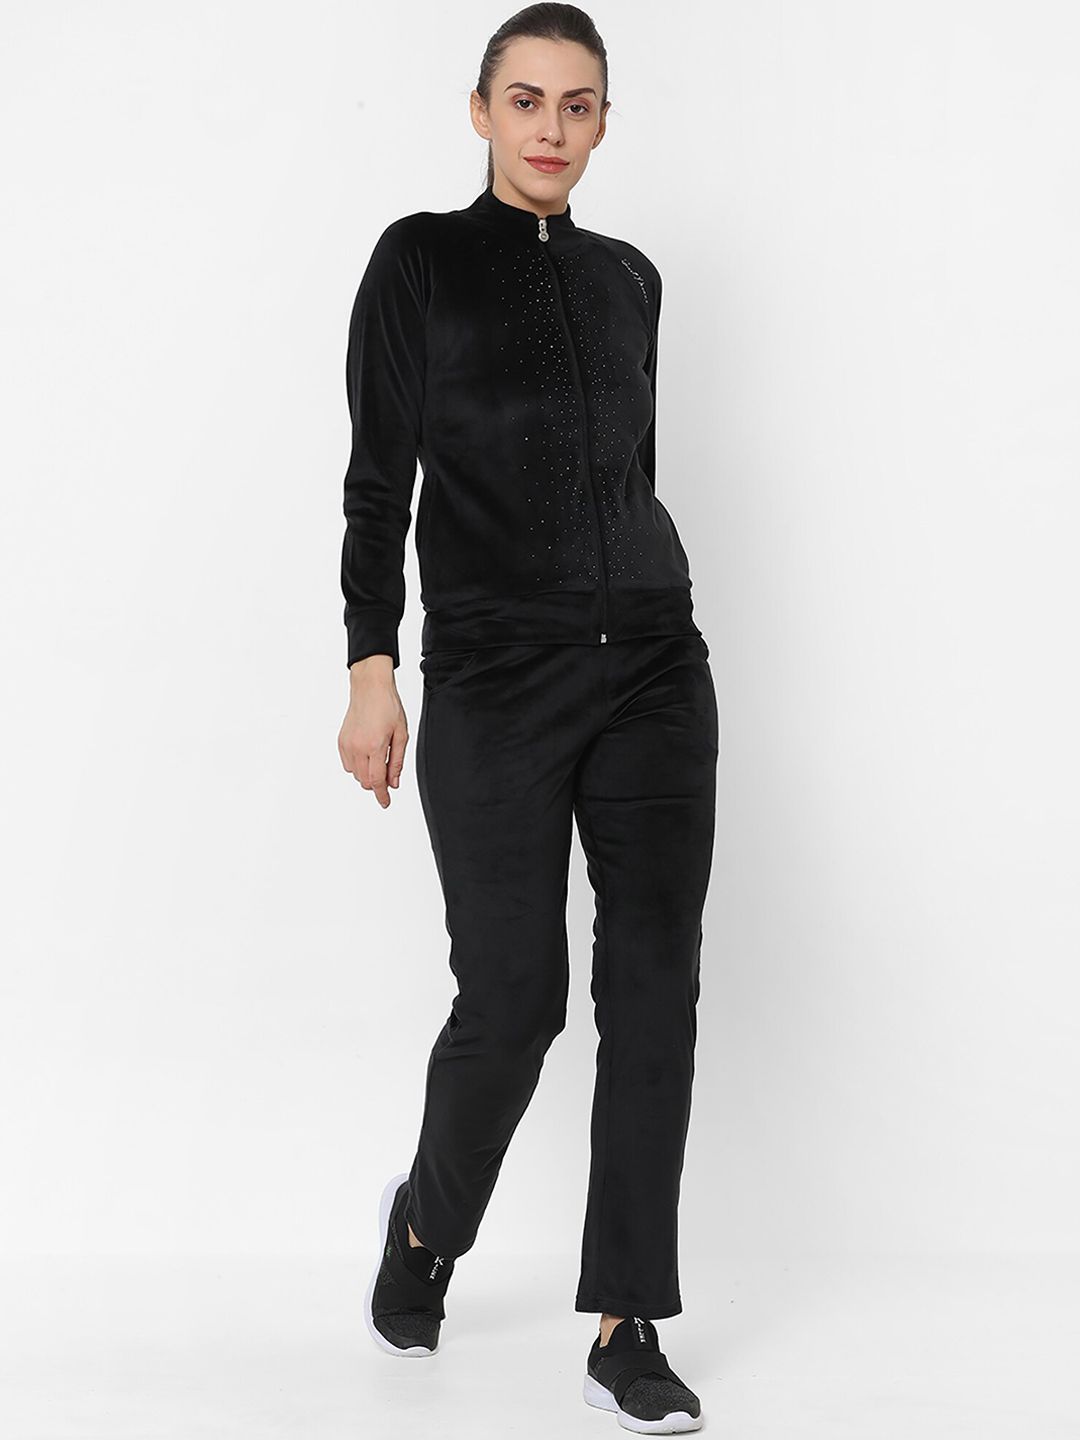 Sweet Dreams Women Black Solid Track Suit Price in India